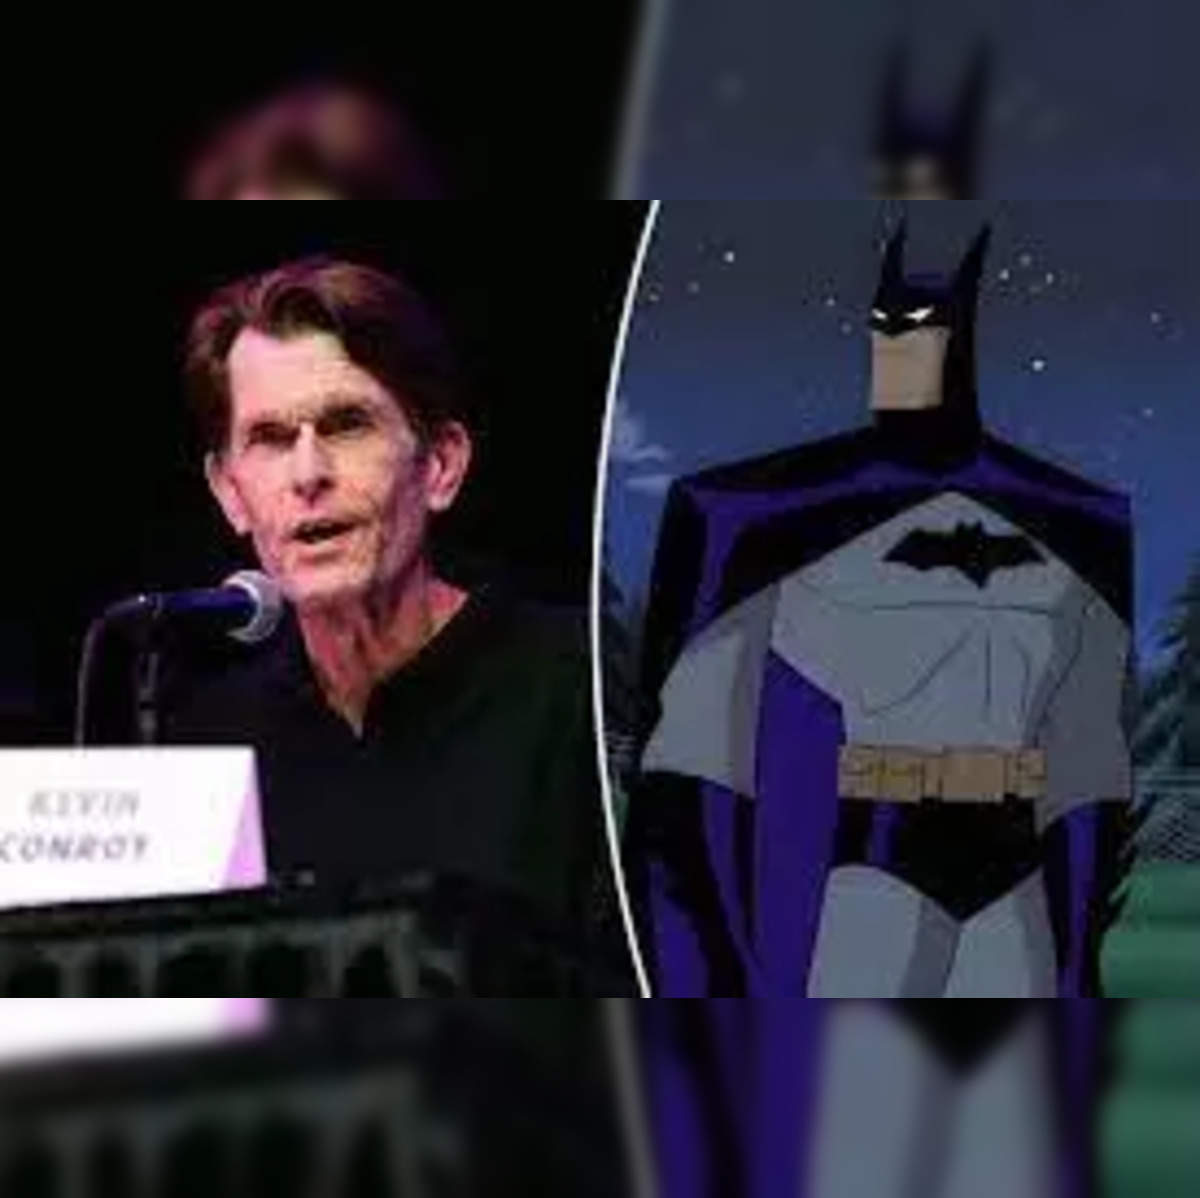 Iconic Batman Voice Actor Kevin Conroy Dies at 66